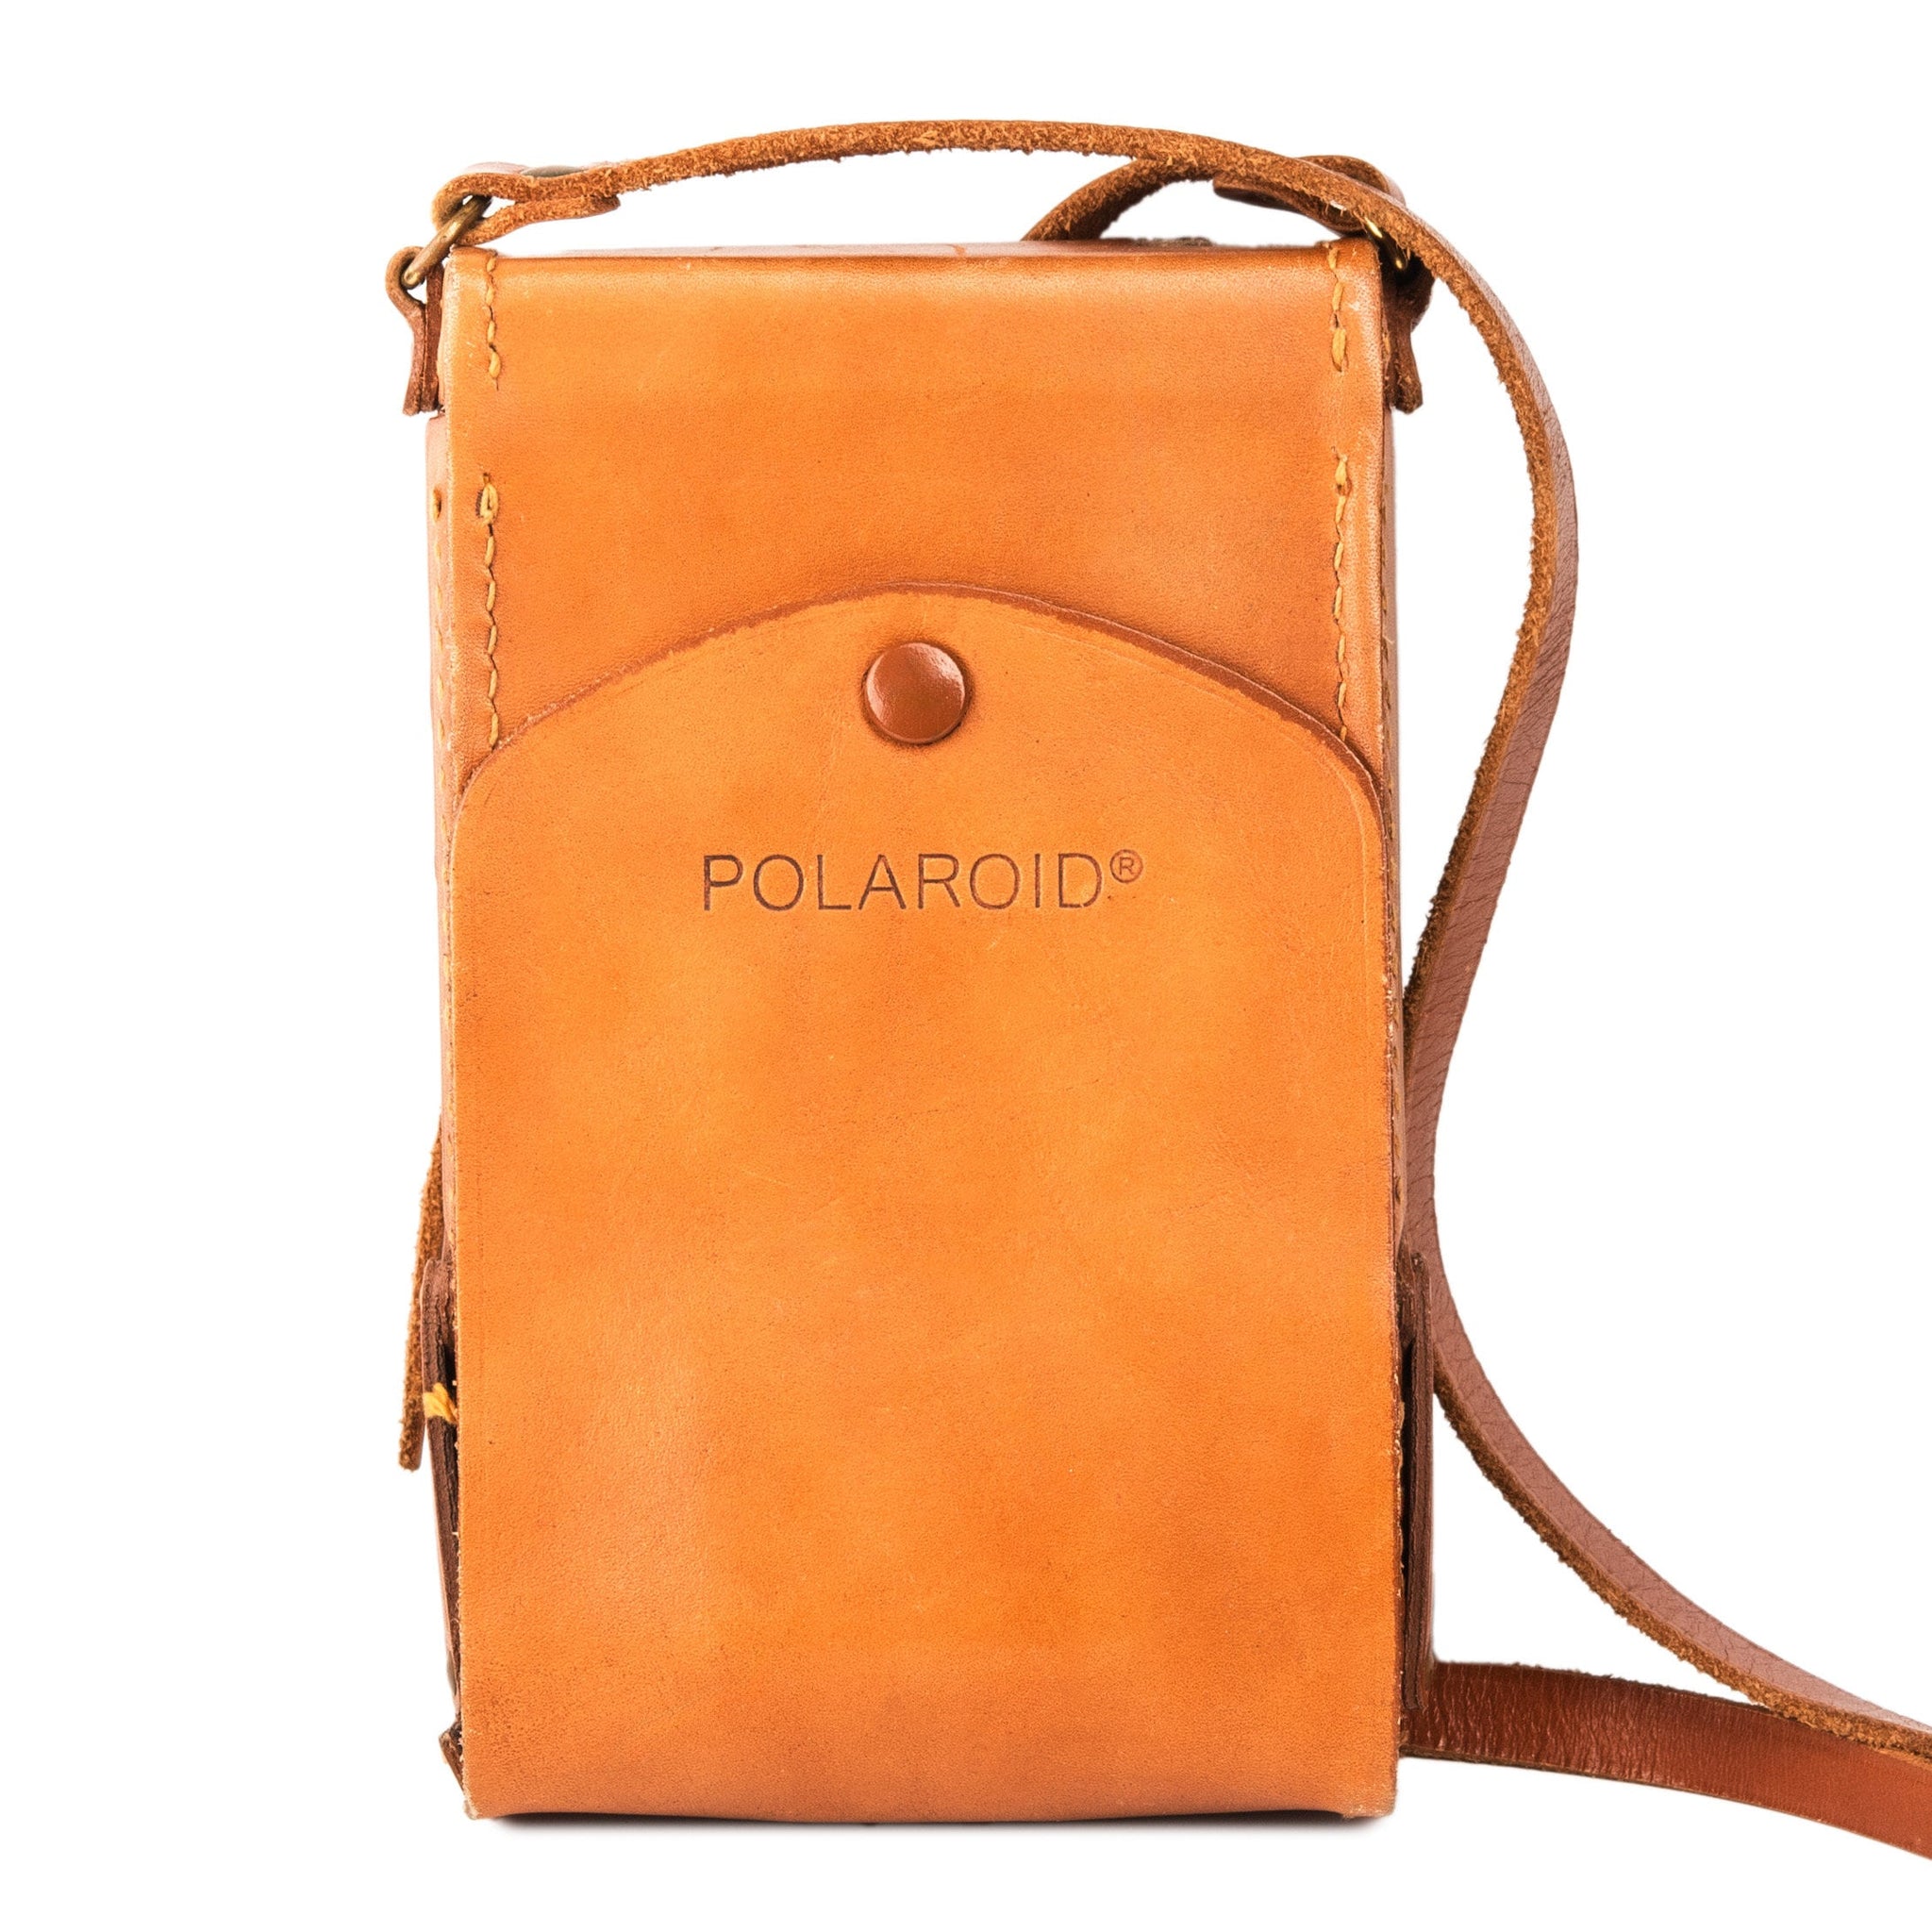 Leather Bag with strap for Polaroid SX-70 Camera, Polaroid sx-70,  Polaroid Camera, Vintage Polaroid, Birthday Gift, Photograph Gift - Vintage Polaroid Instant Cameras